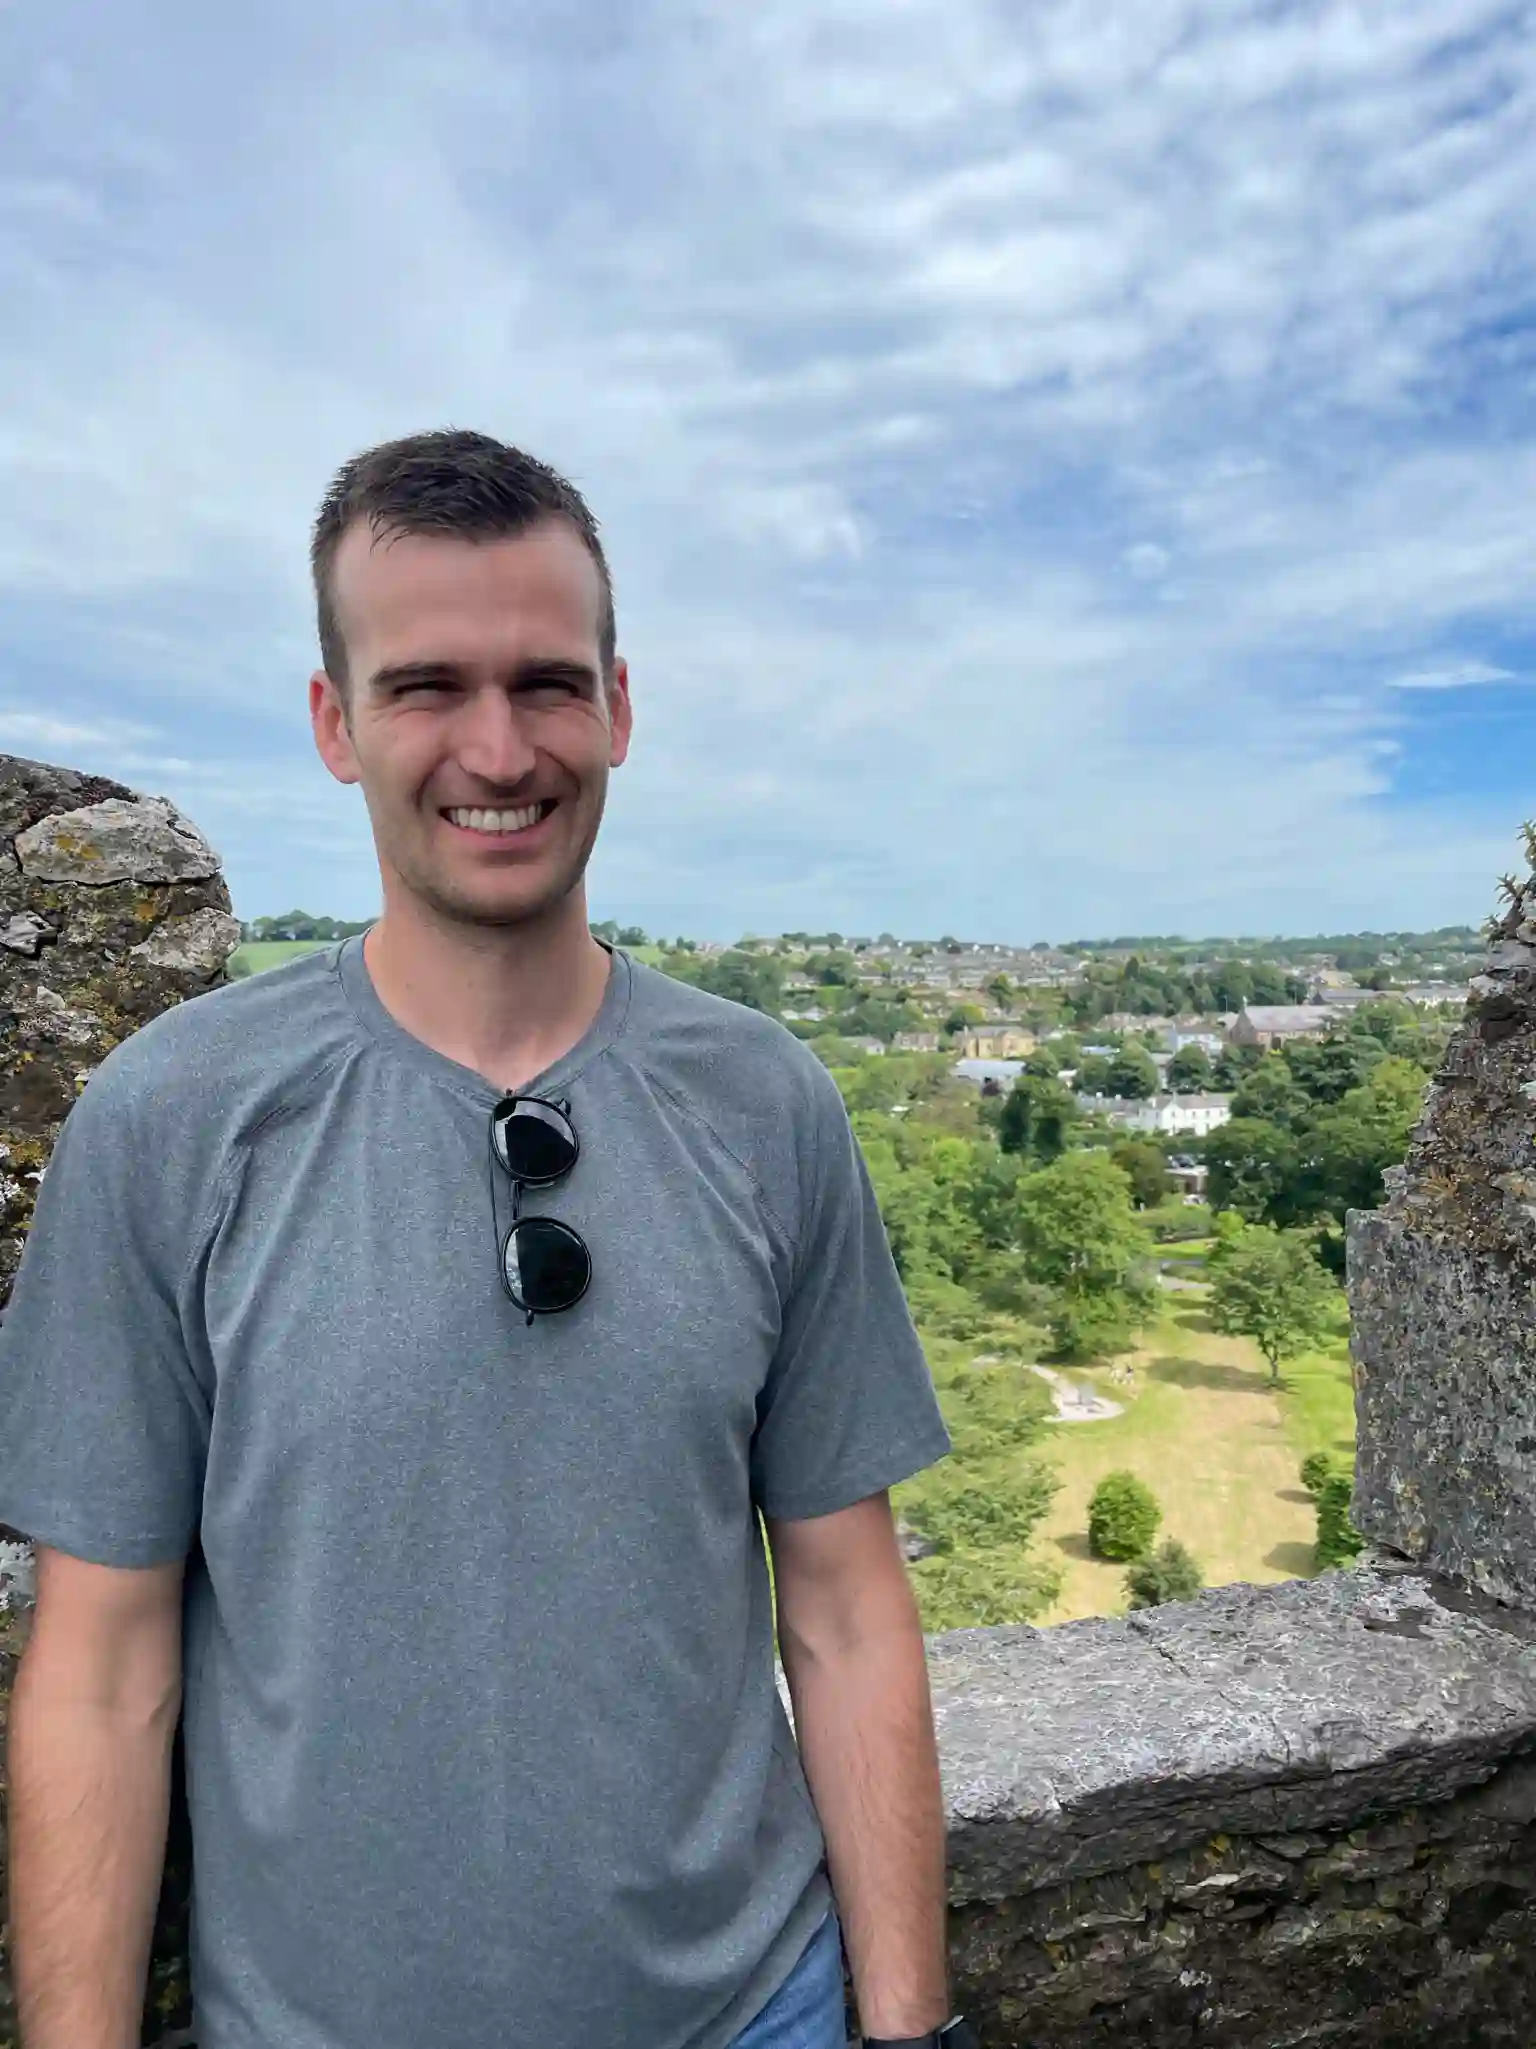 Ross at the top of Blarney Castle in Ireland.